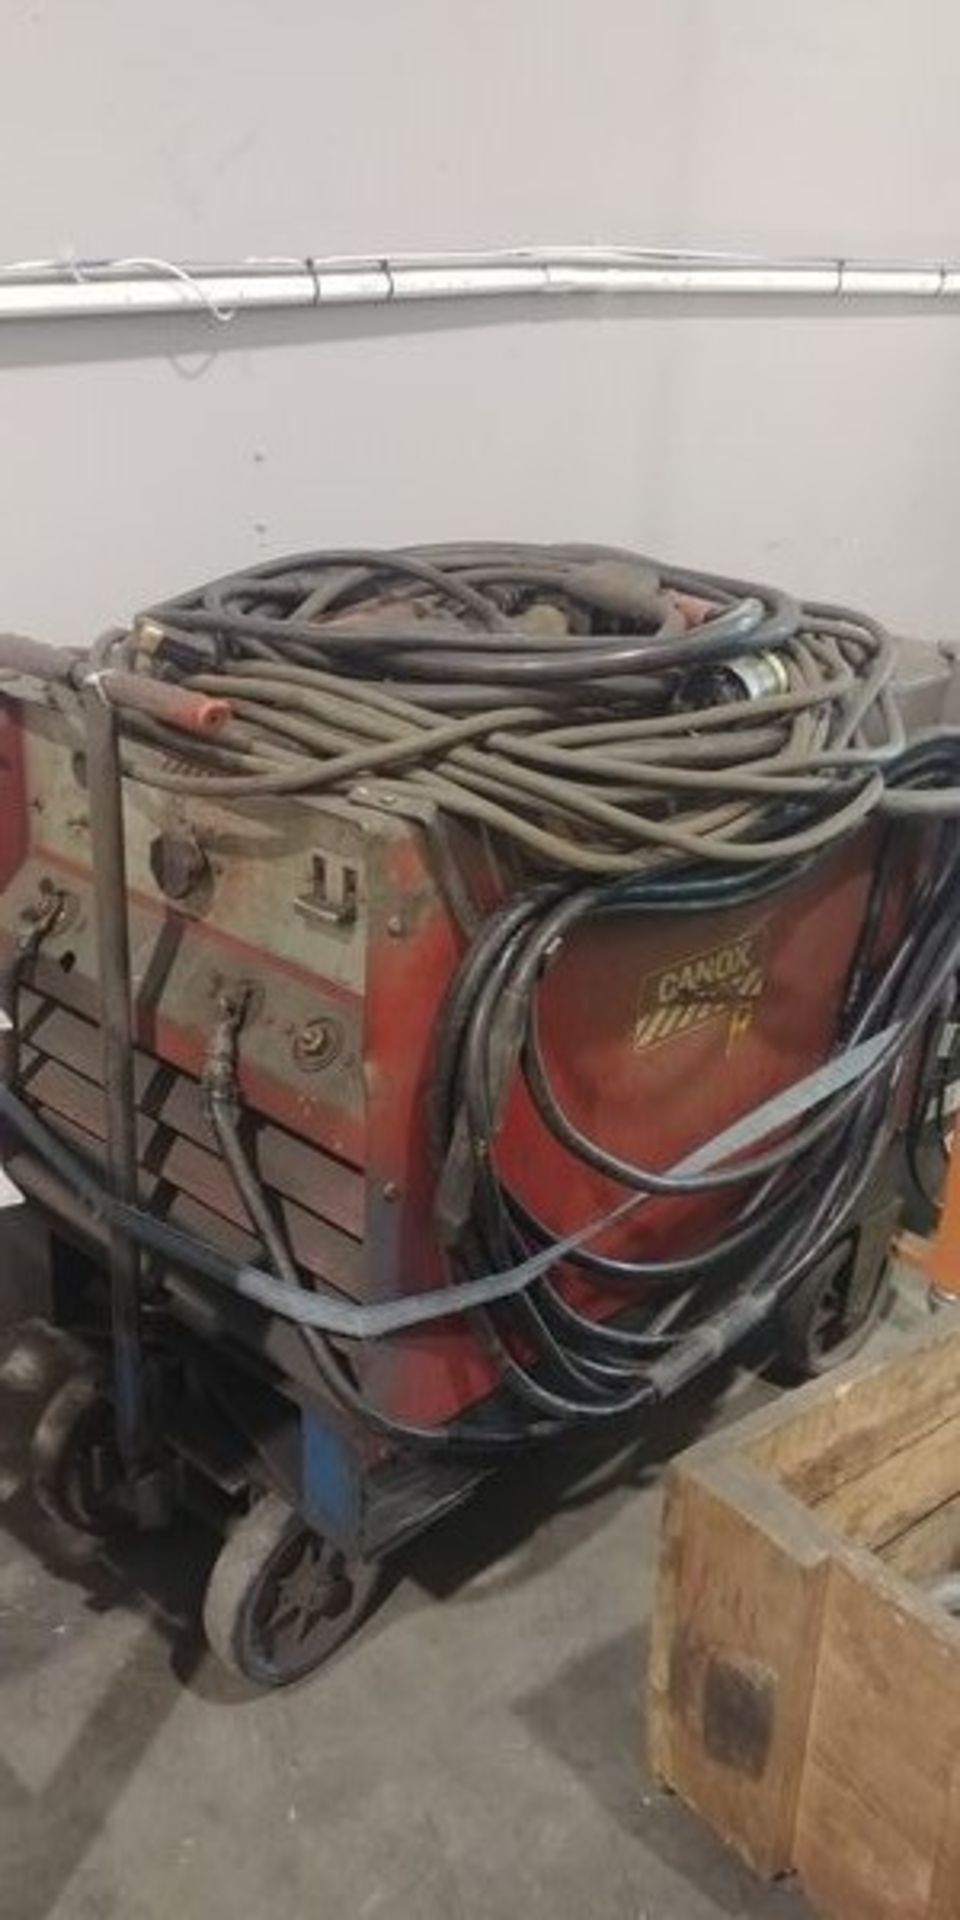 Canox Arc Welder including Cables